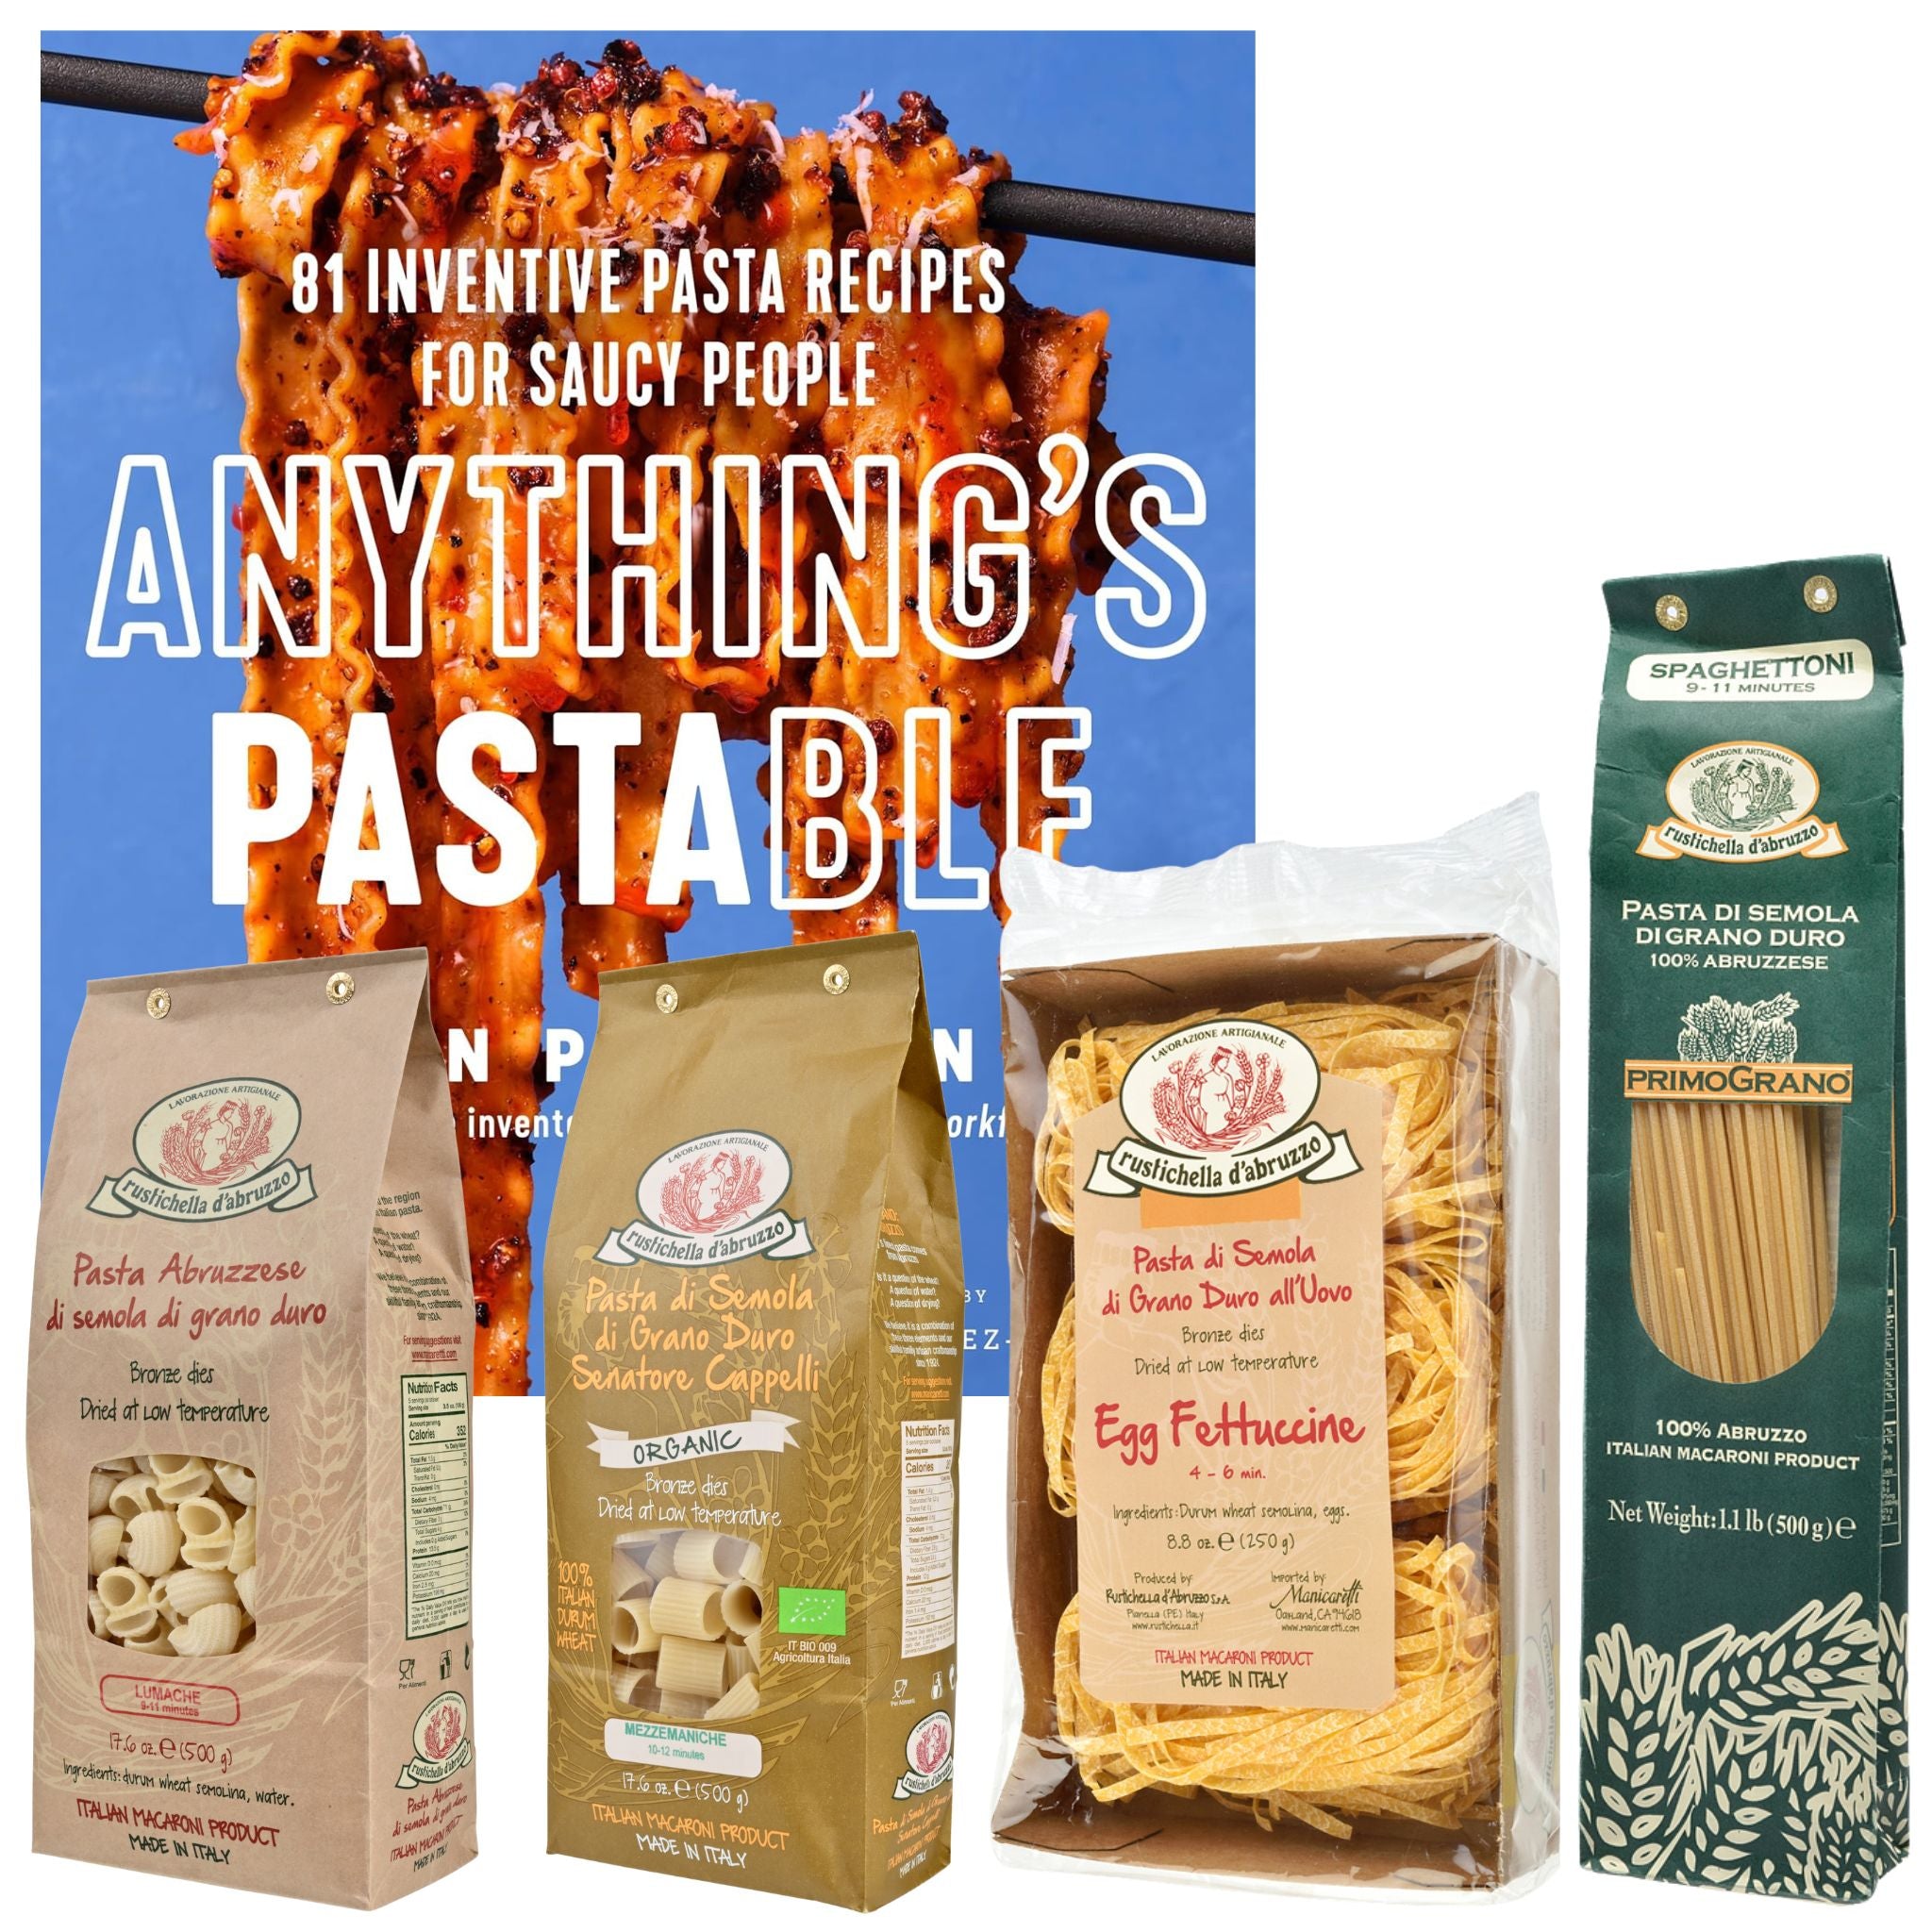 Anything's Pastable Pasta Kit